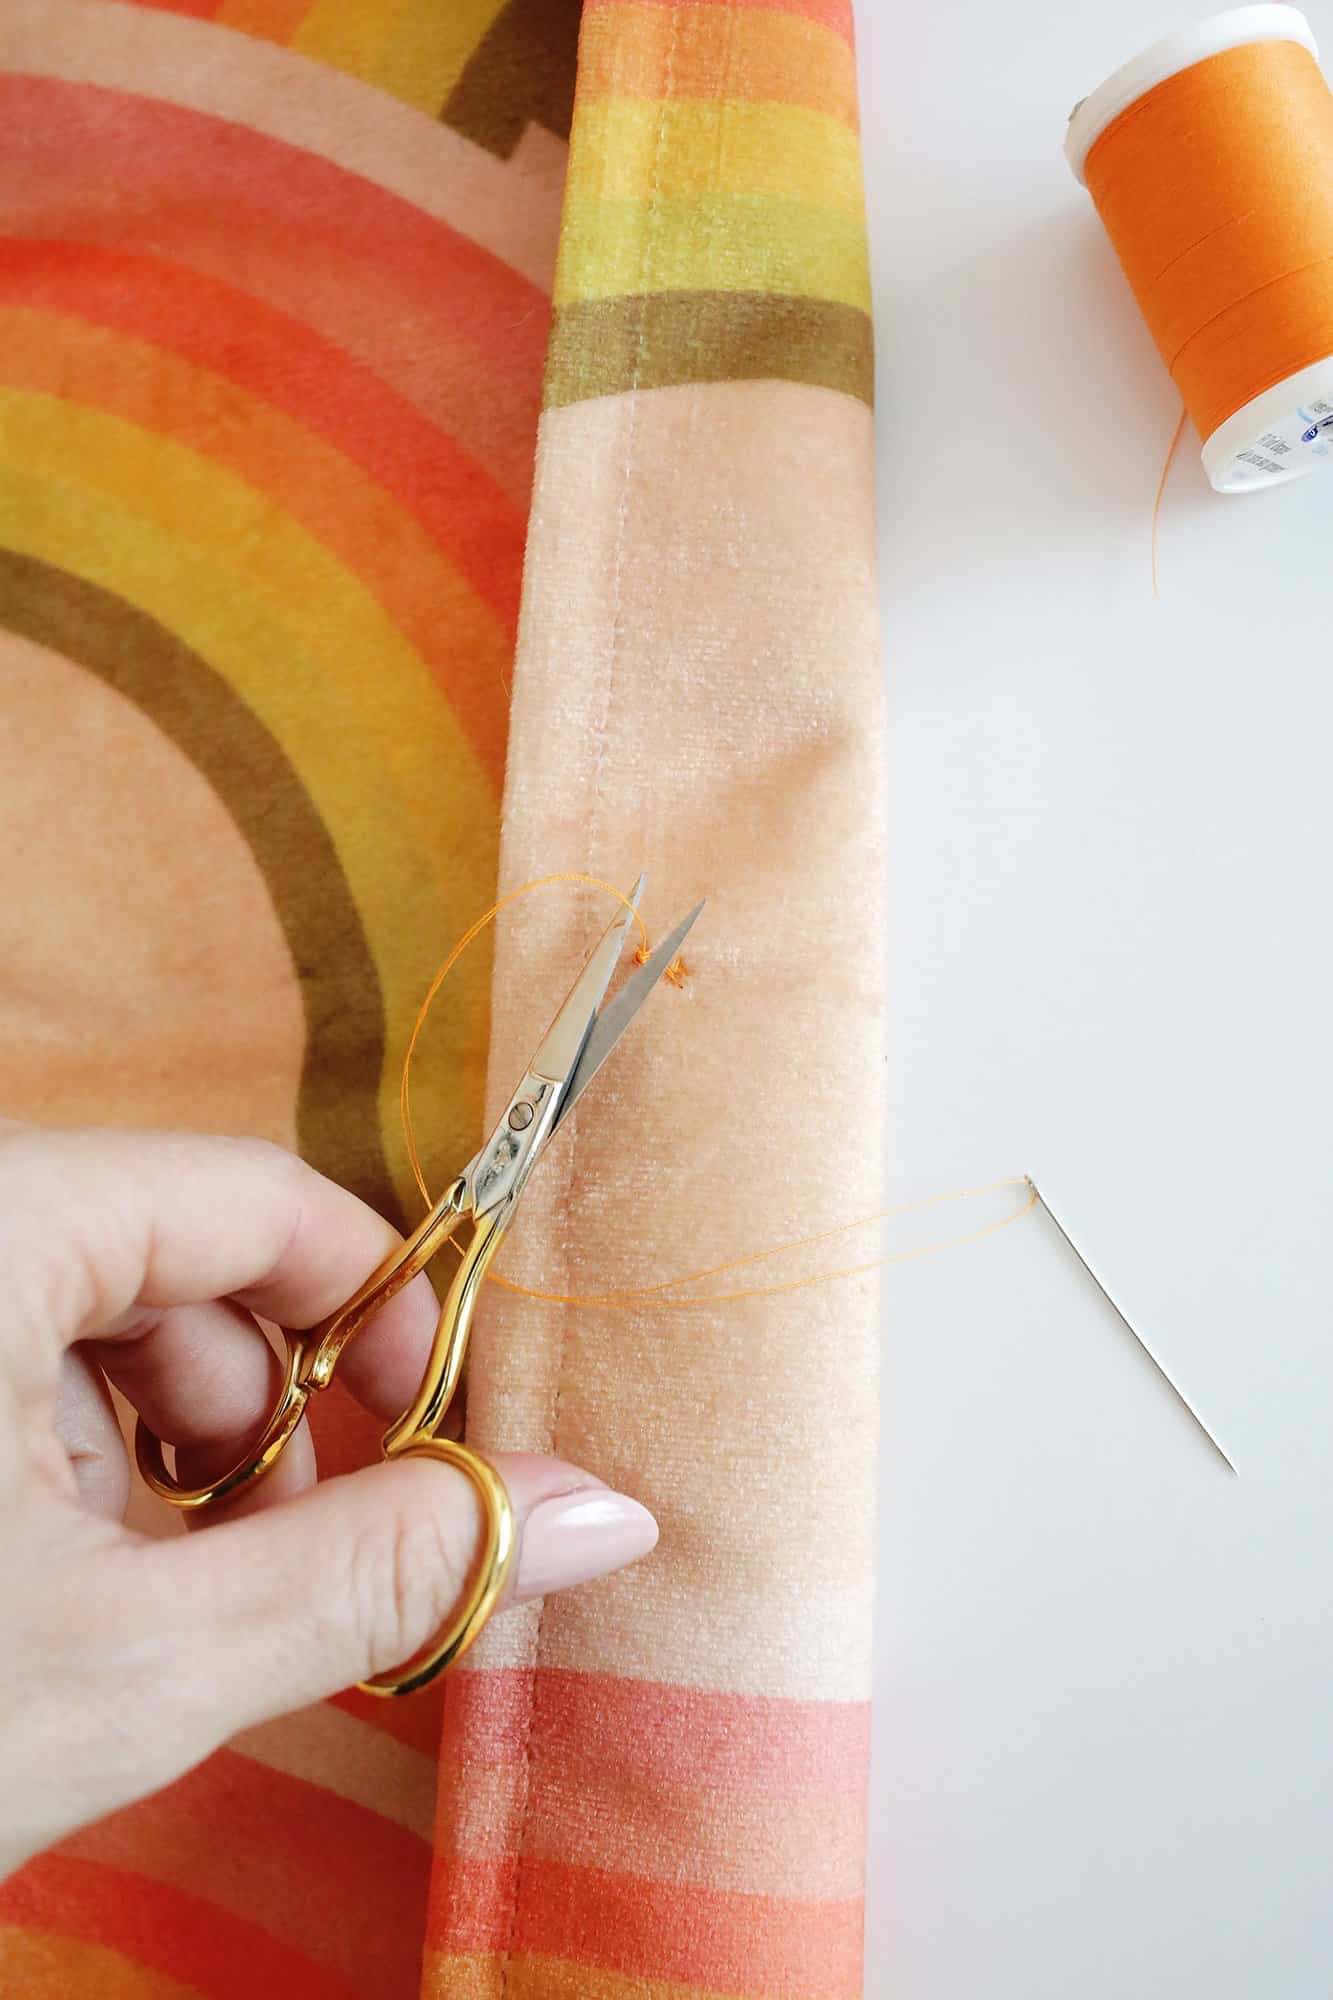 cutting off the thread on a button being sewn